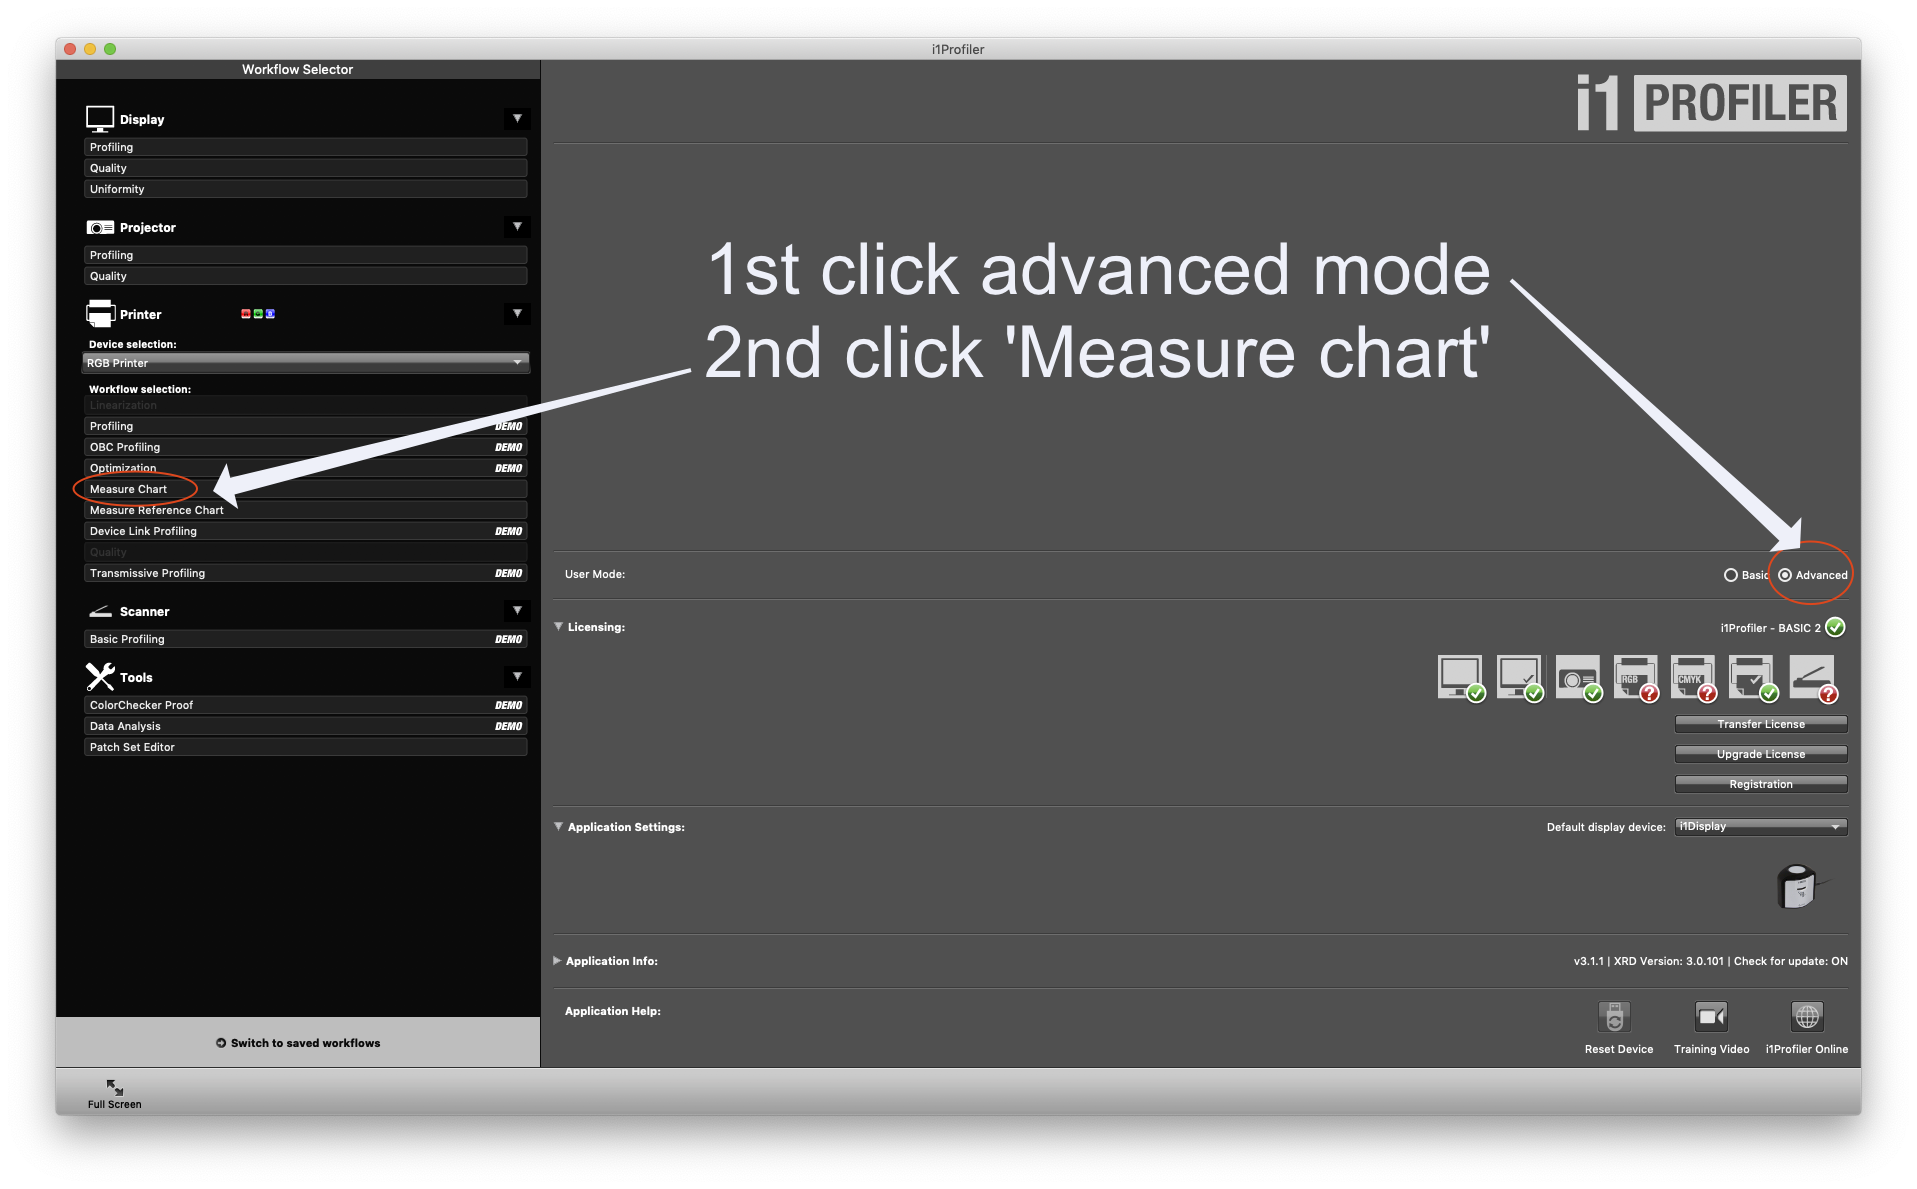 **Selecting Advanced mode is essential to be able to access the 'Measure Chart' function**